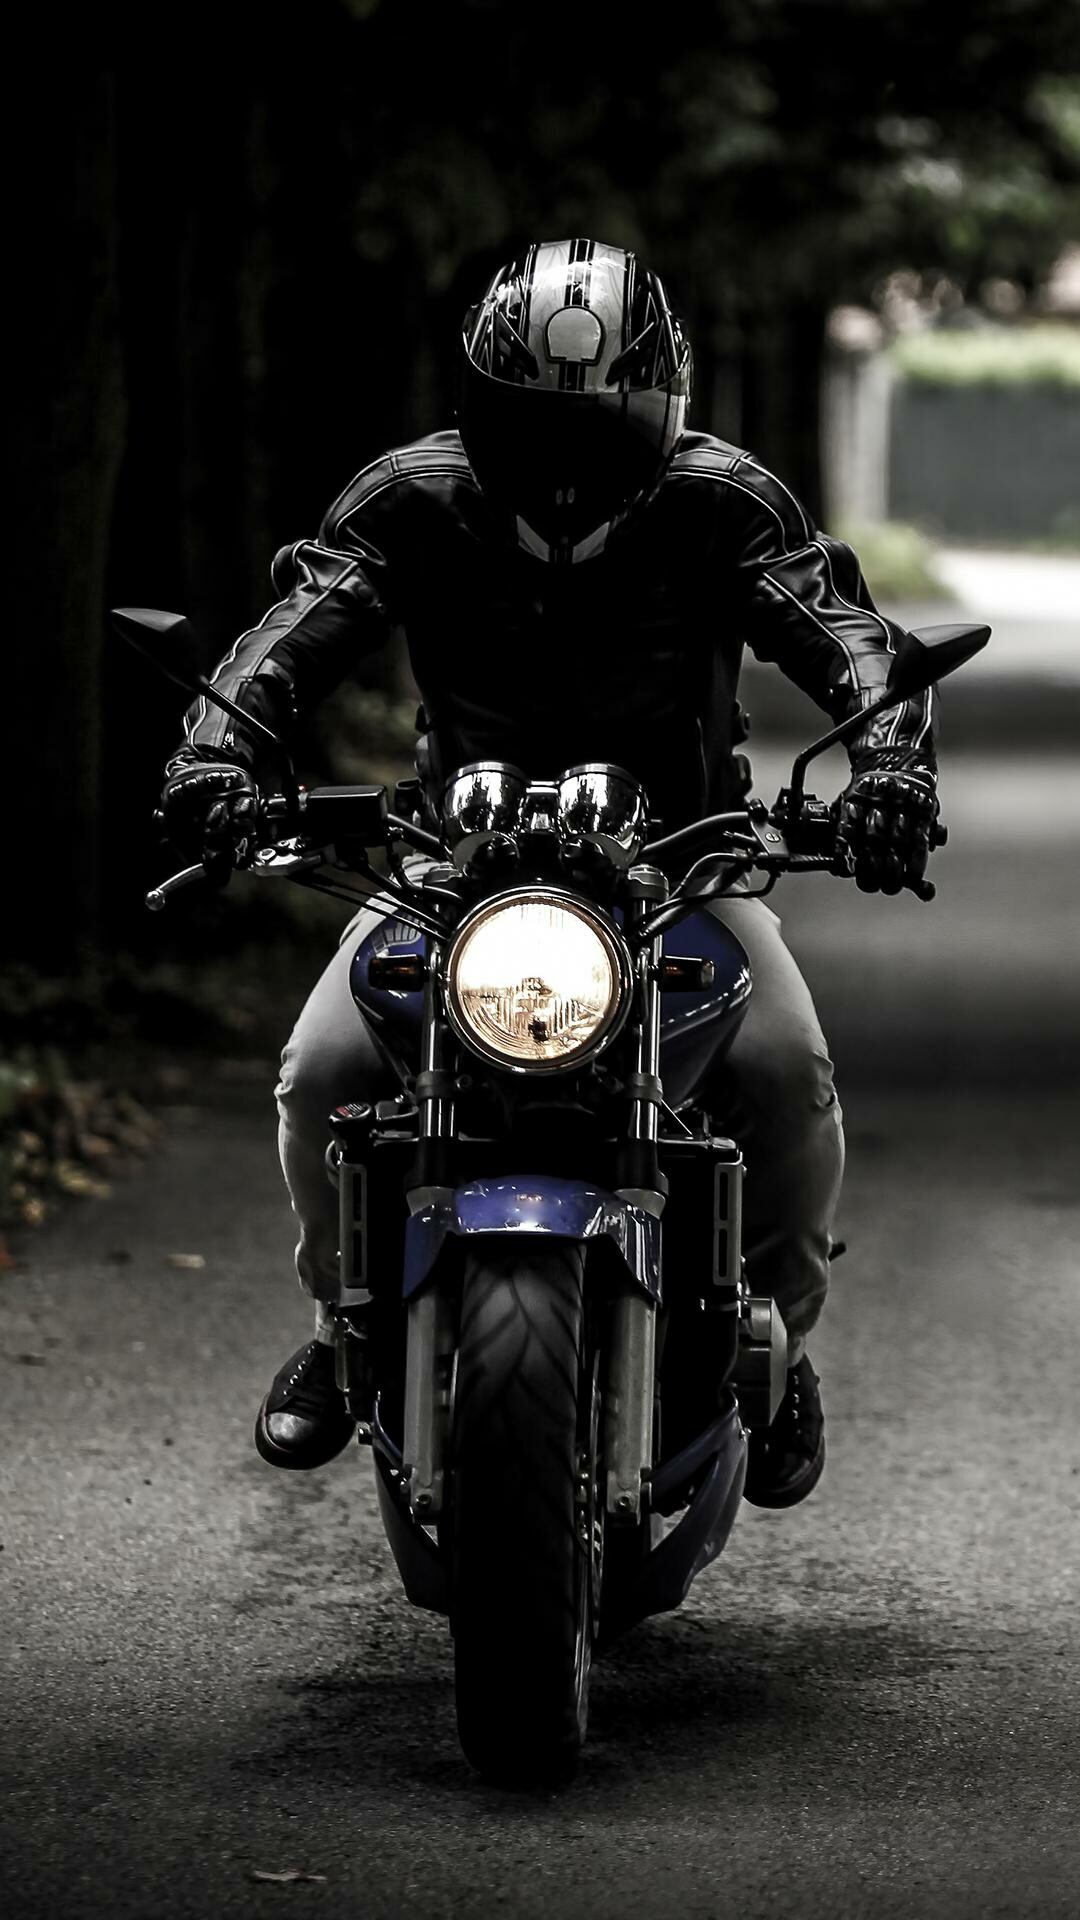 Android phone motorcycle wallpapers, Ride in style, Mobile eye-candy, Bike lover's bliss, 1080x1920 Full HD Phone